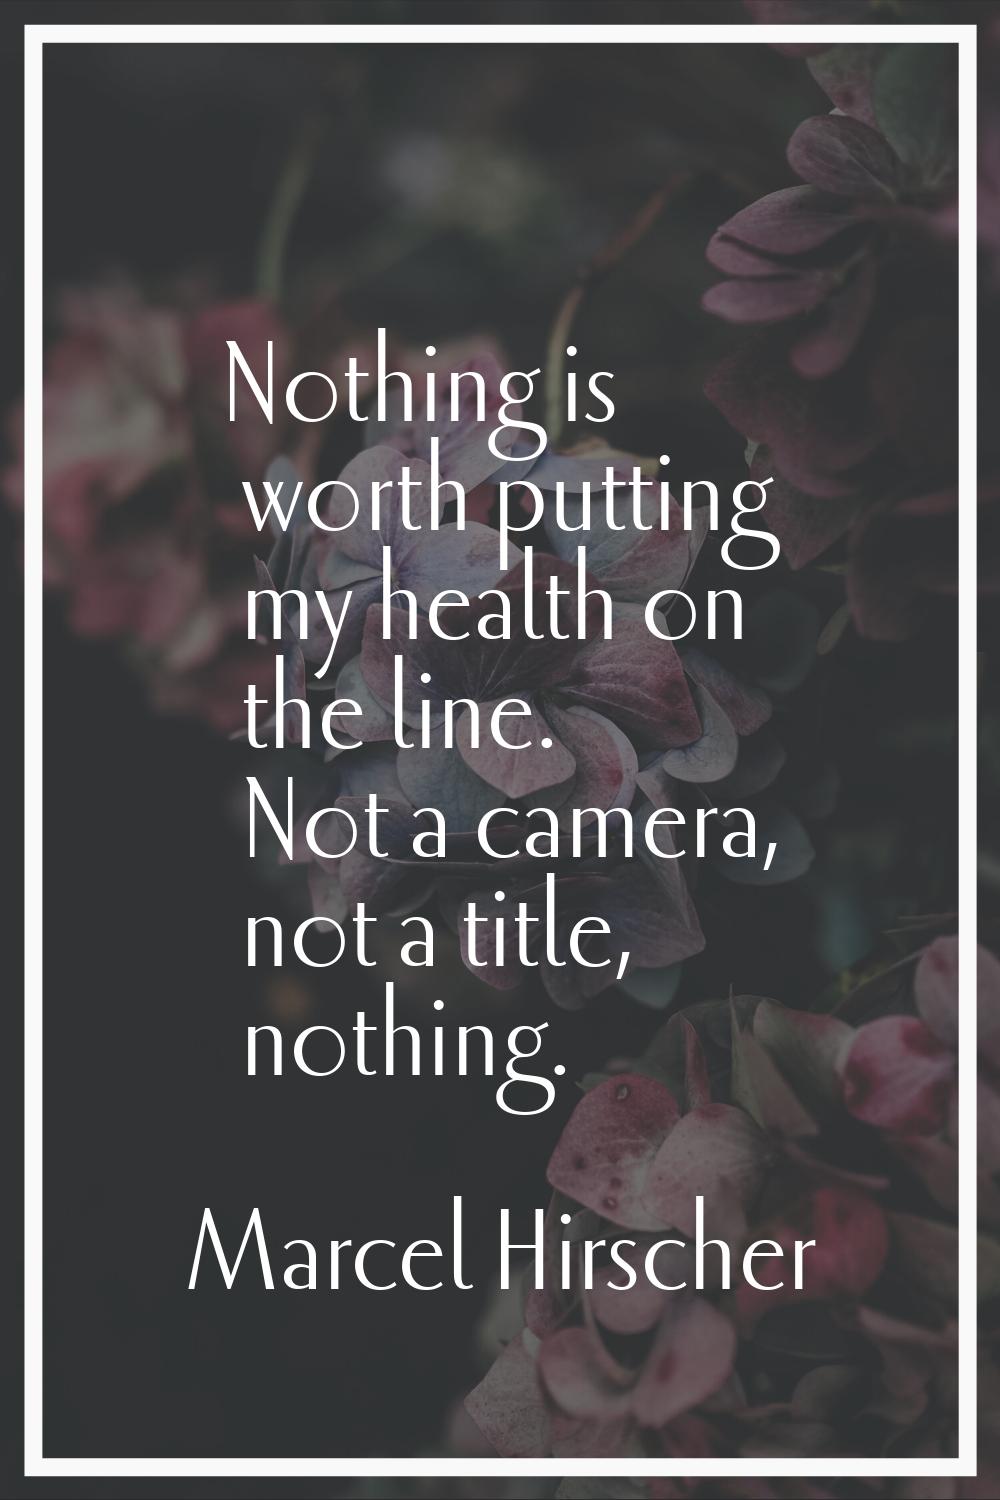 Nothing is worth putting my health on the line. Not a camera, not a title, nothing.